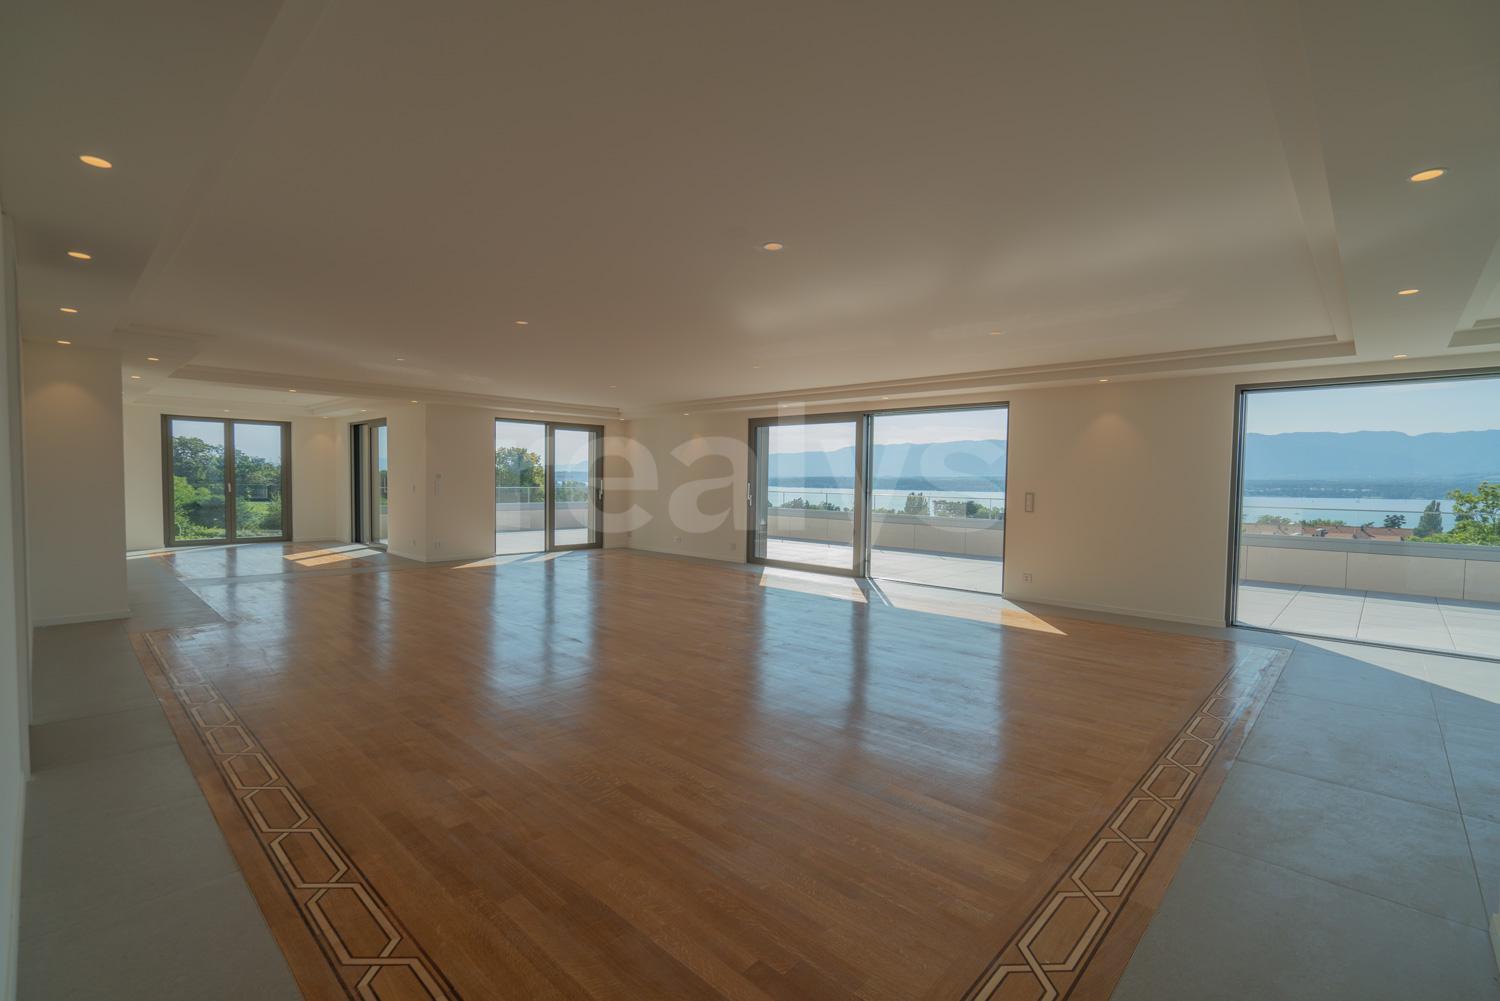 PrivaliaSumptuous 7.5 room penthouse with panoramic view of the lake and mountains